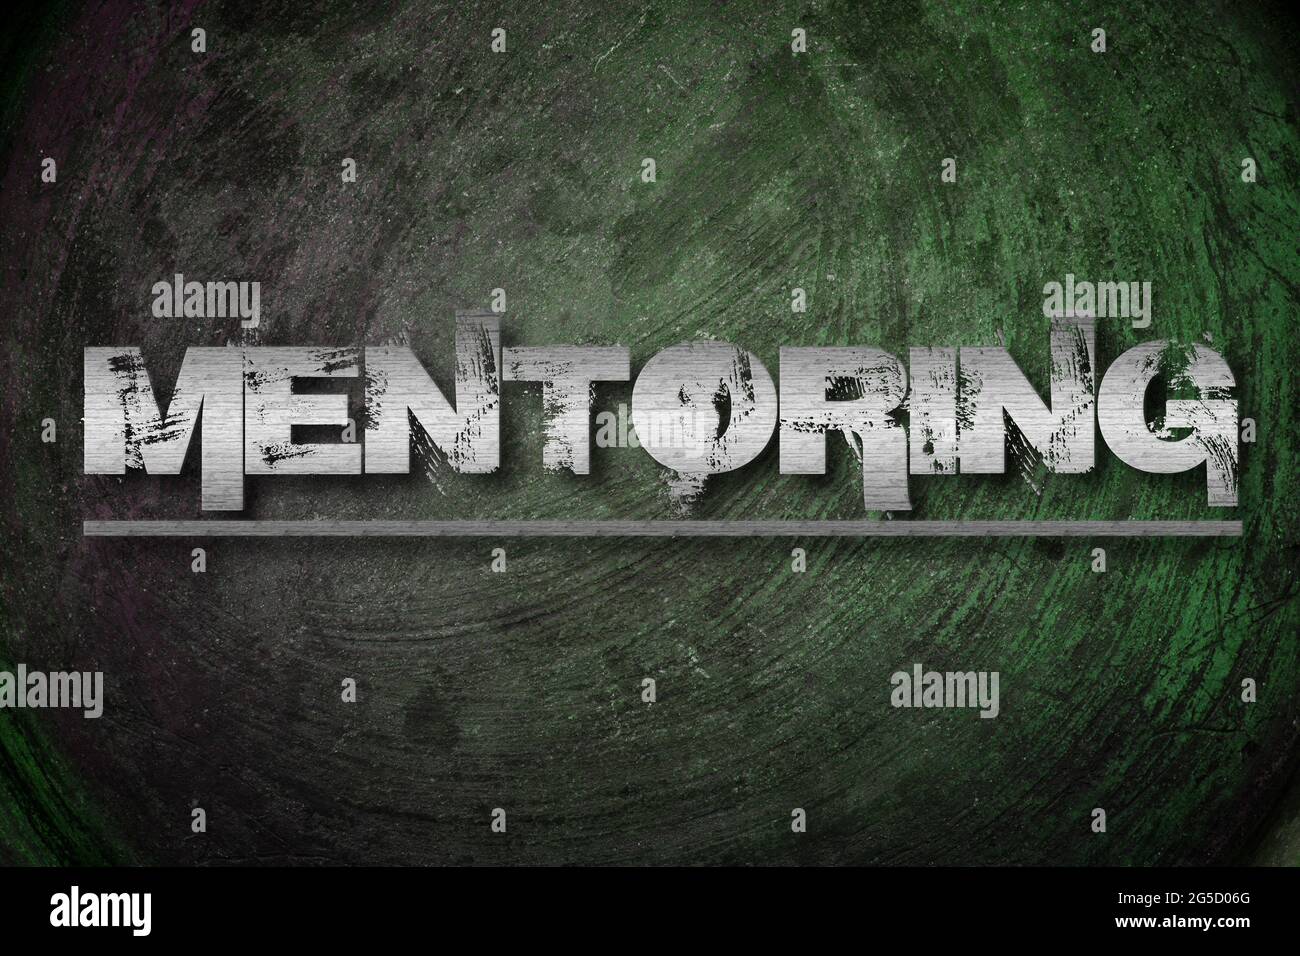 Mentoring Concept text on background Stock Photo